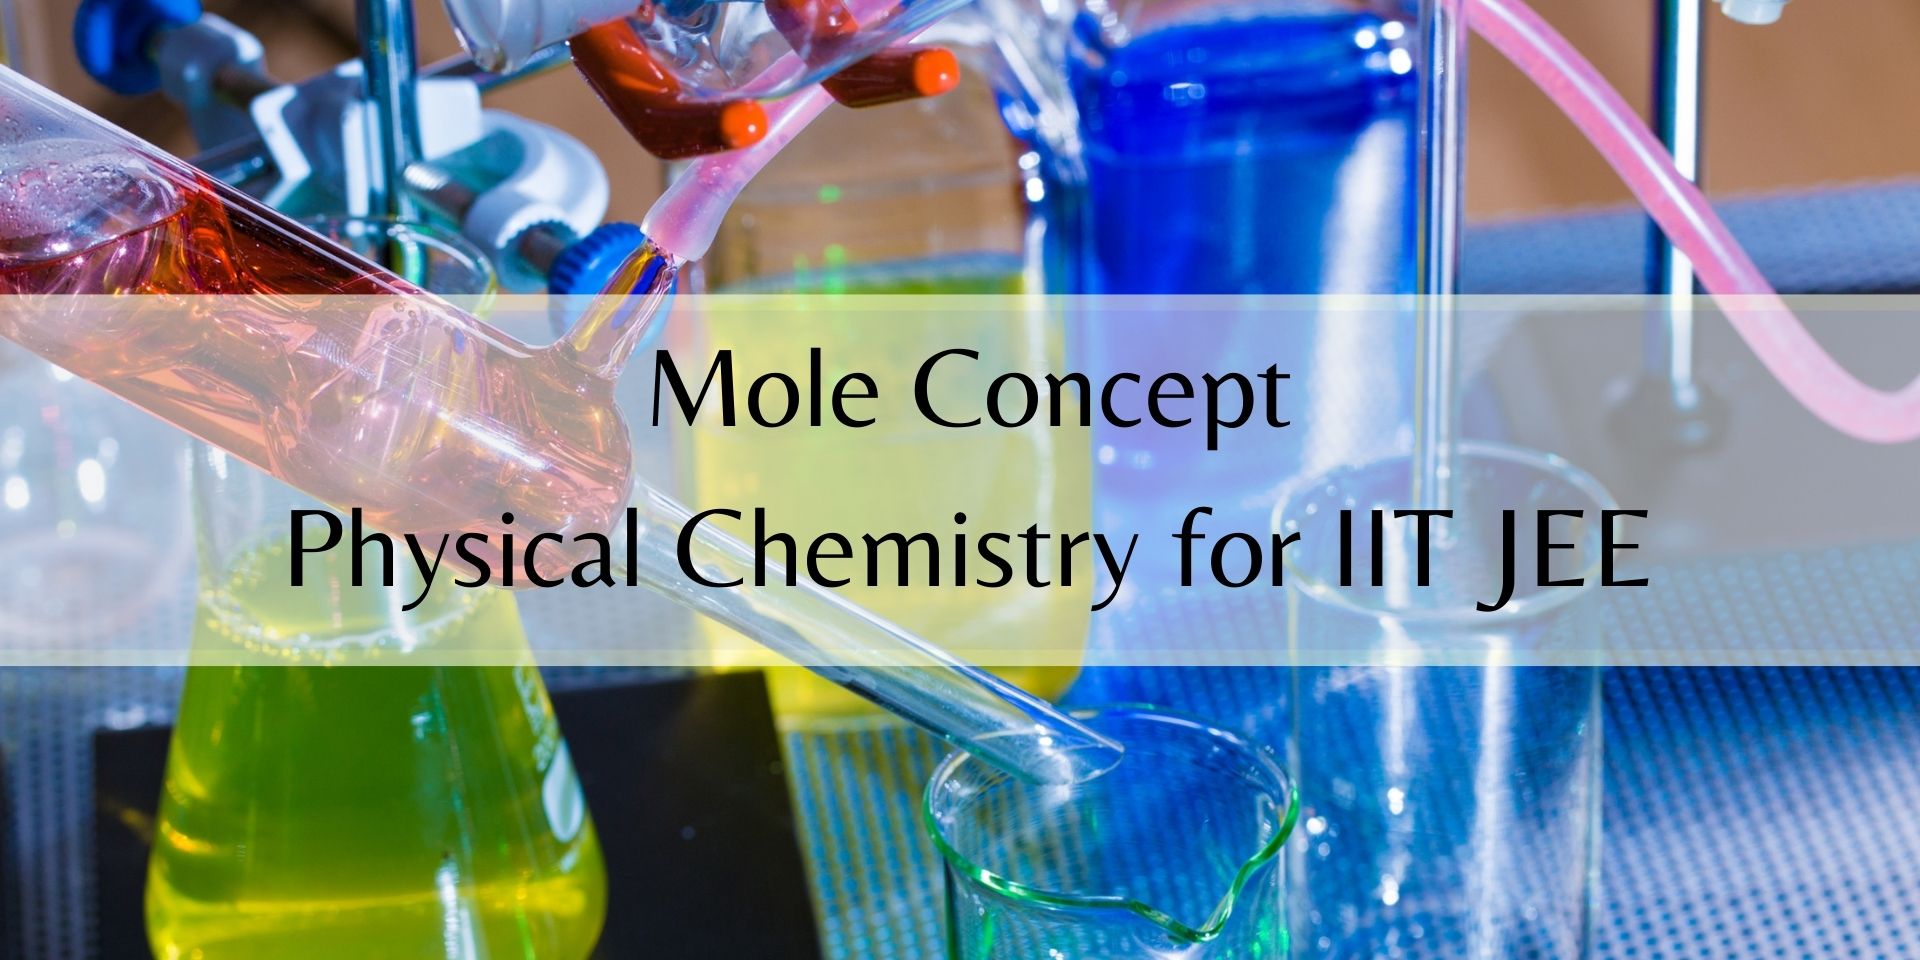 Mole Concept: IIT JEE Physical Chemistry Foundations